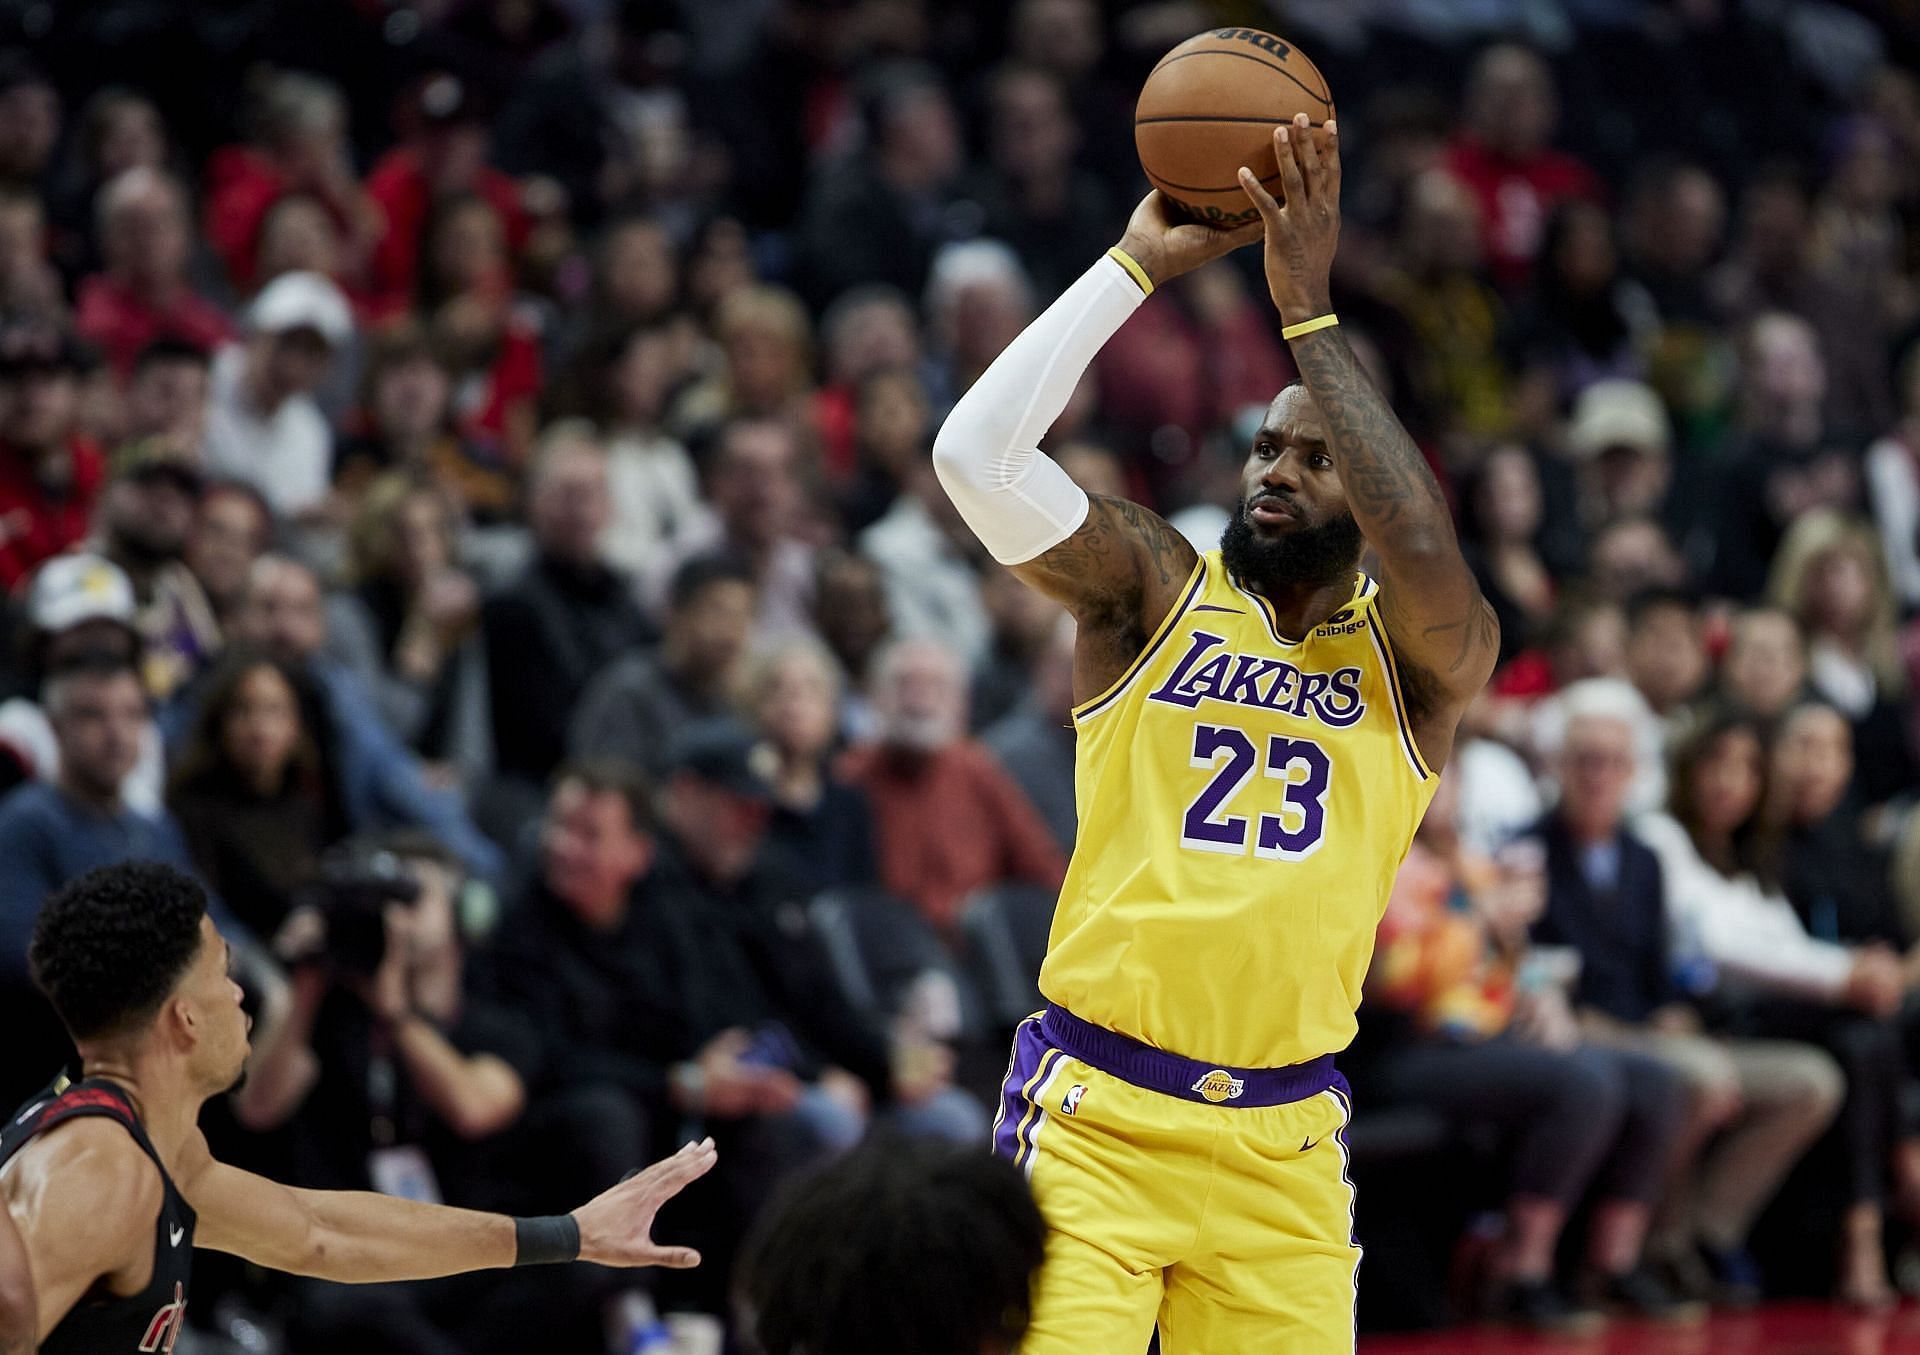 LeBron James becomes first player to record 39k points during Jazz-Lakers